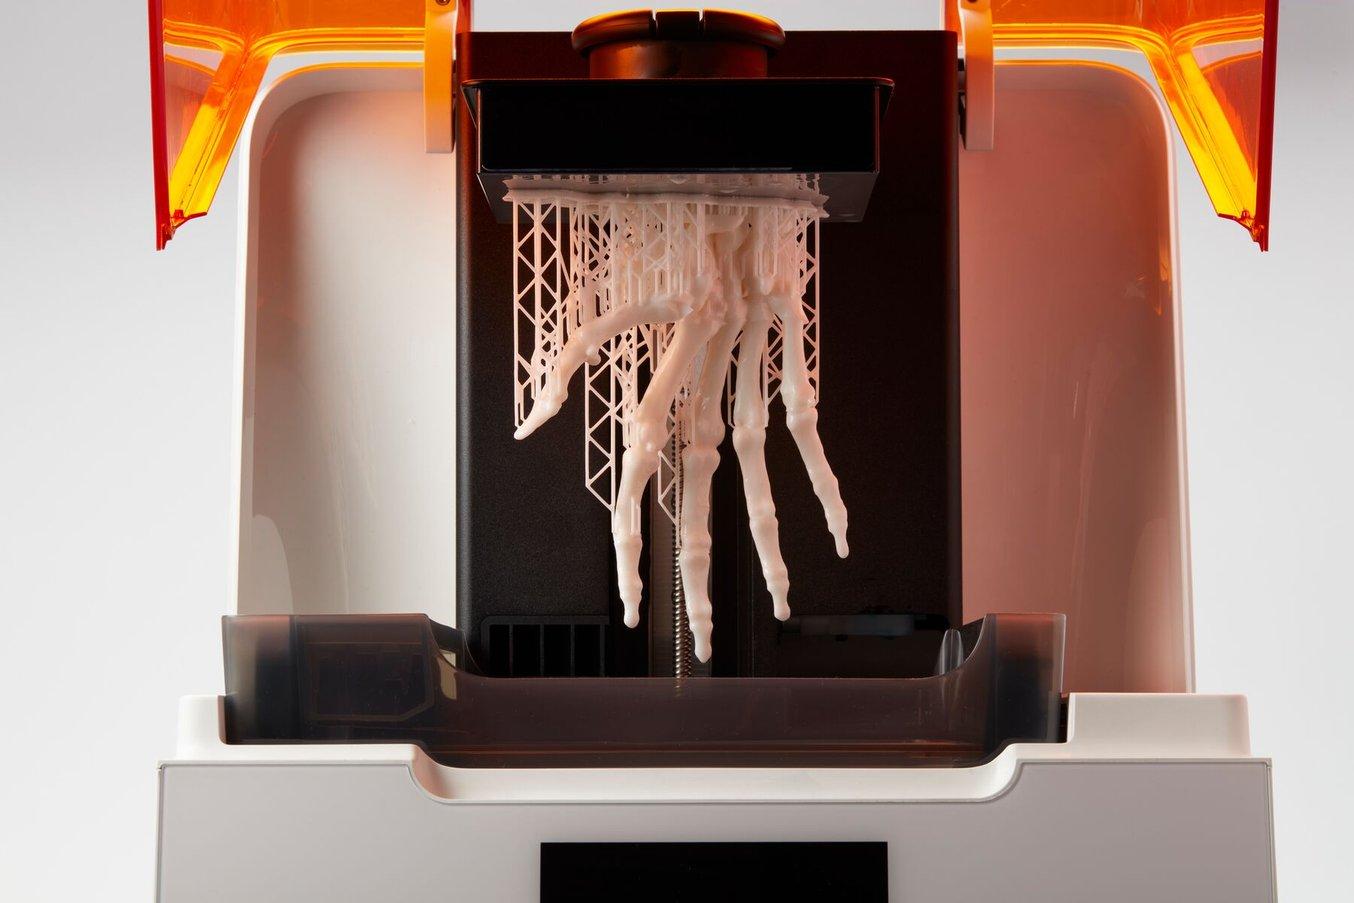 Stereolithography - Form 3B Resin 3D Printer